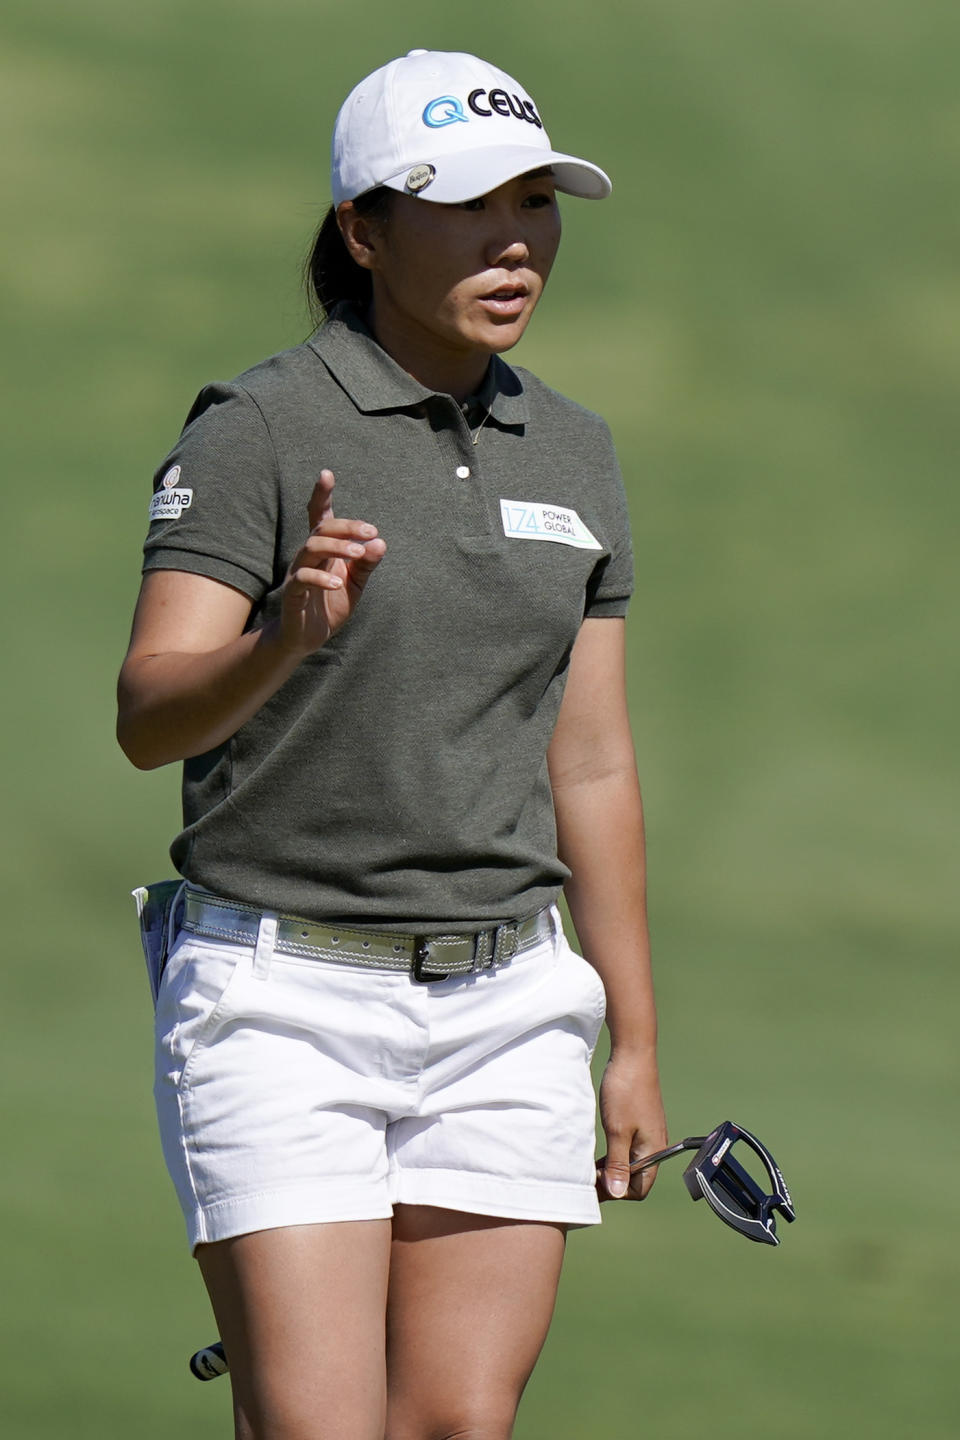 In-Kyung Kim, of South Korea, waves after her putt on the second hole during the second round of the LPGA Tour ANA Inspiration golf tournament at Mission Hills Country Club Friday, April 5, 2019, in Rancho Mirage, Calif. (AP Photo/Chris Carlson)